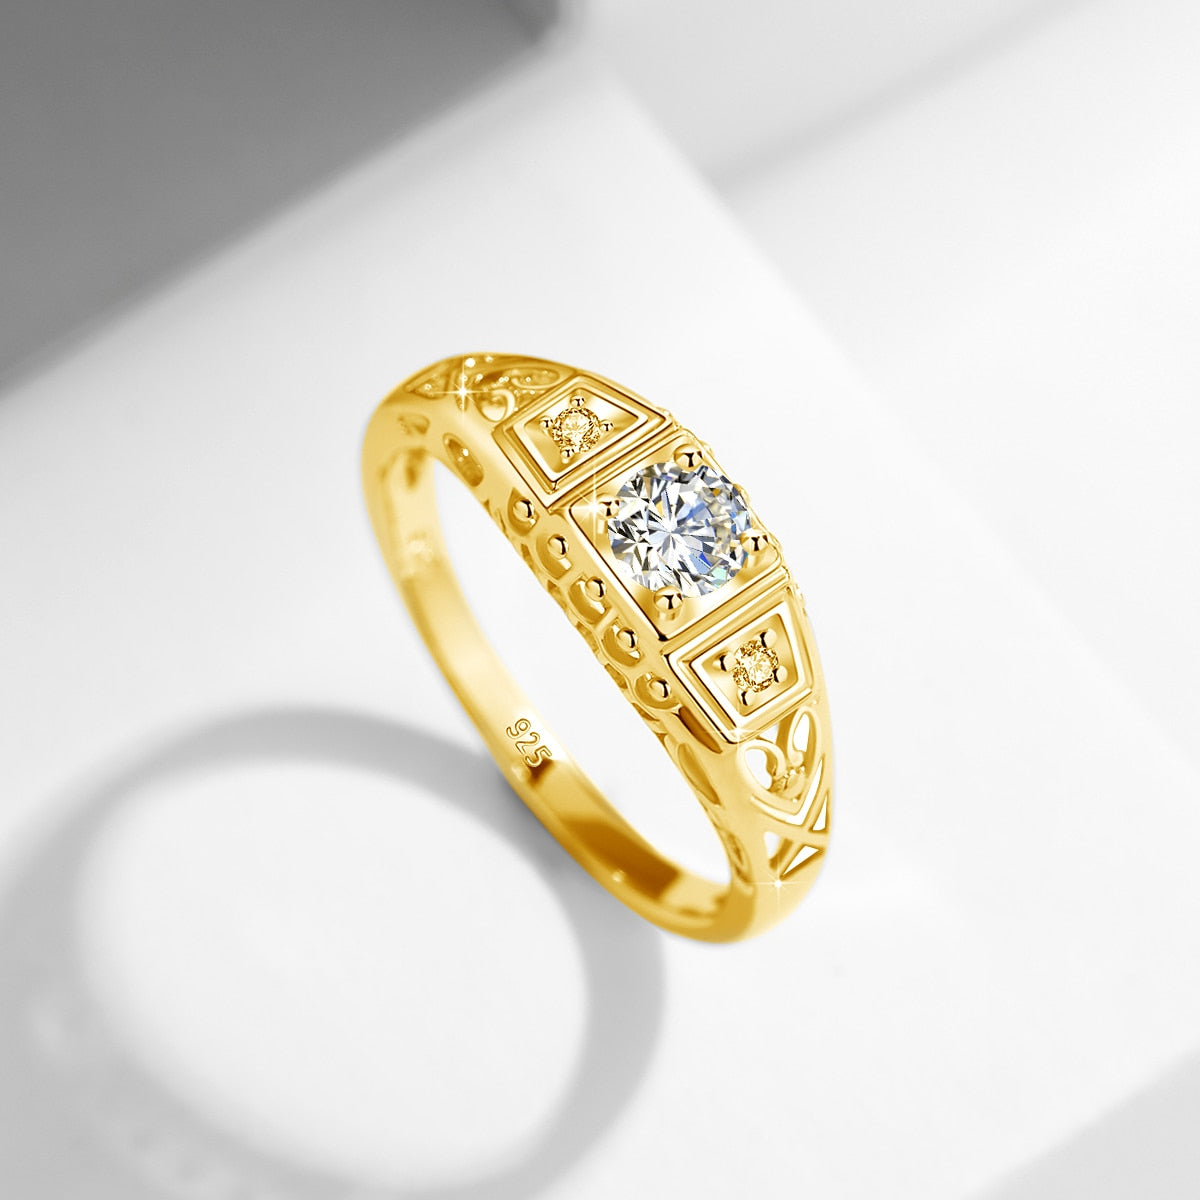 A gold Edwardian style vintage filigree engagement ring with a larger stone surrounded by two smaller side stones.